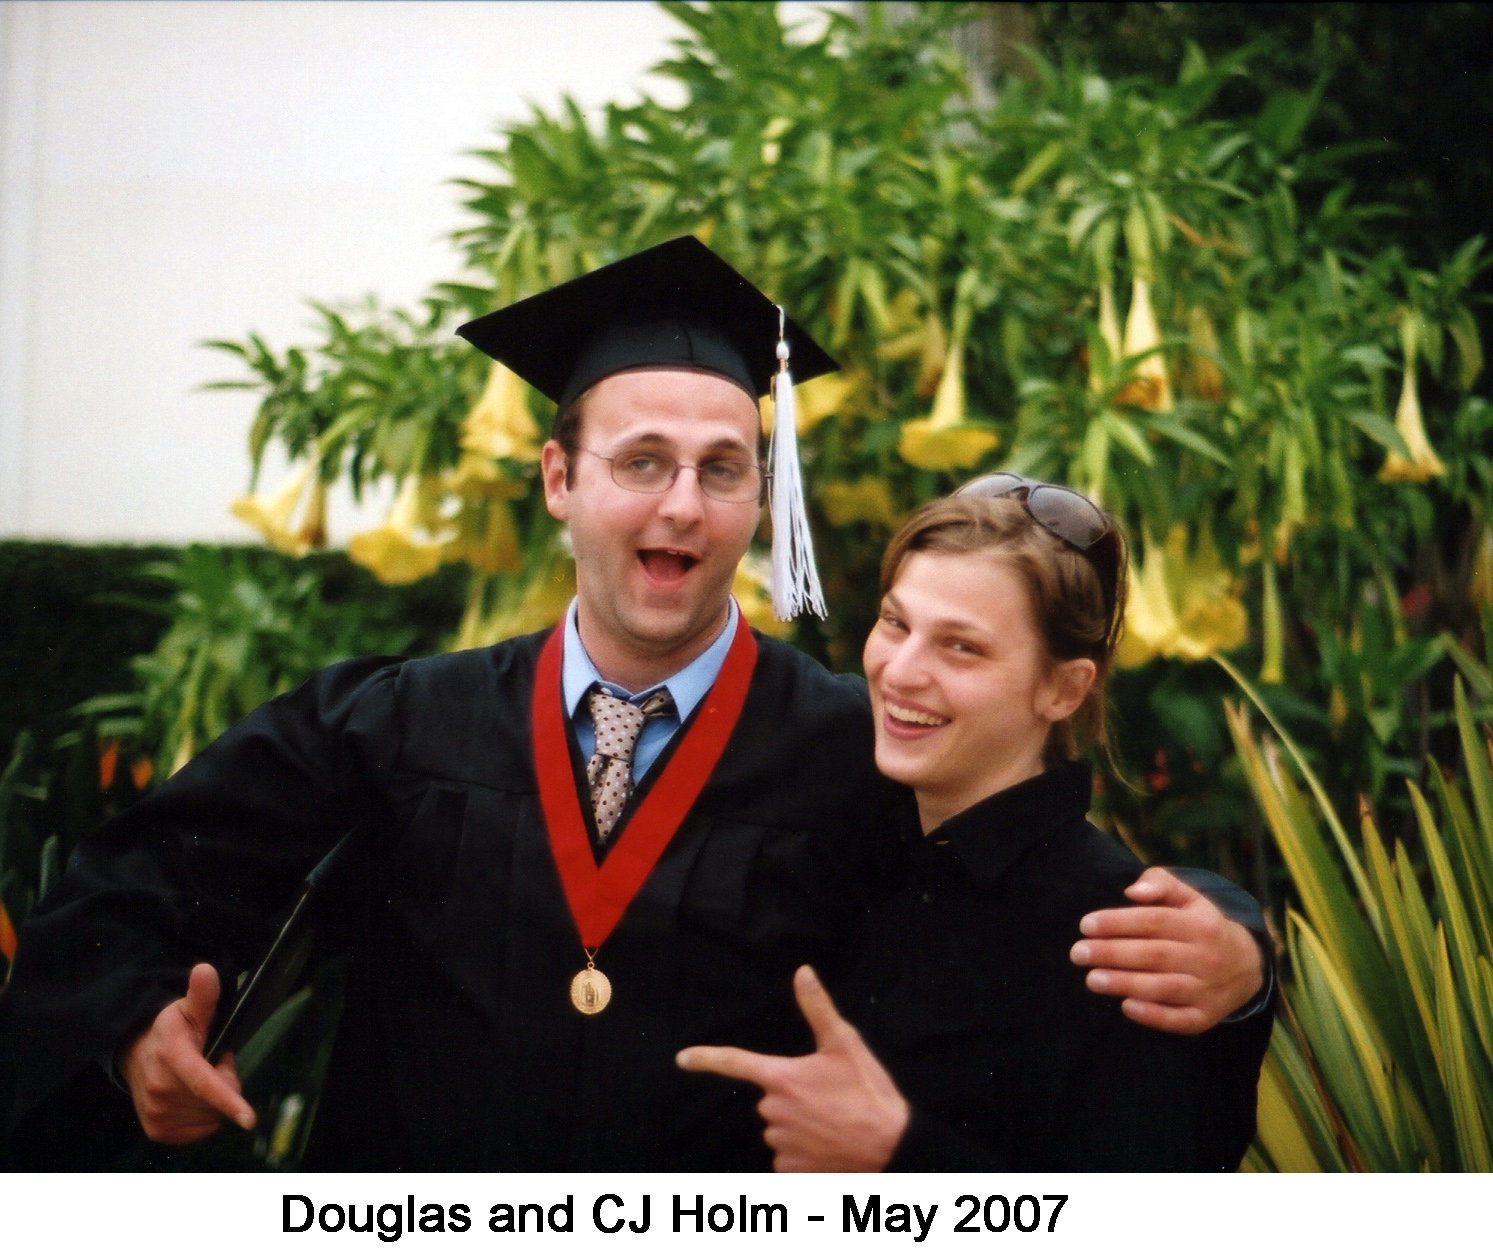 Doug is in his graduation robes with one arm around his sister. 
     A flowering plant is behind them. 